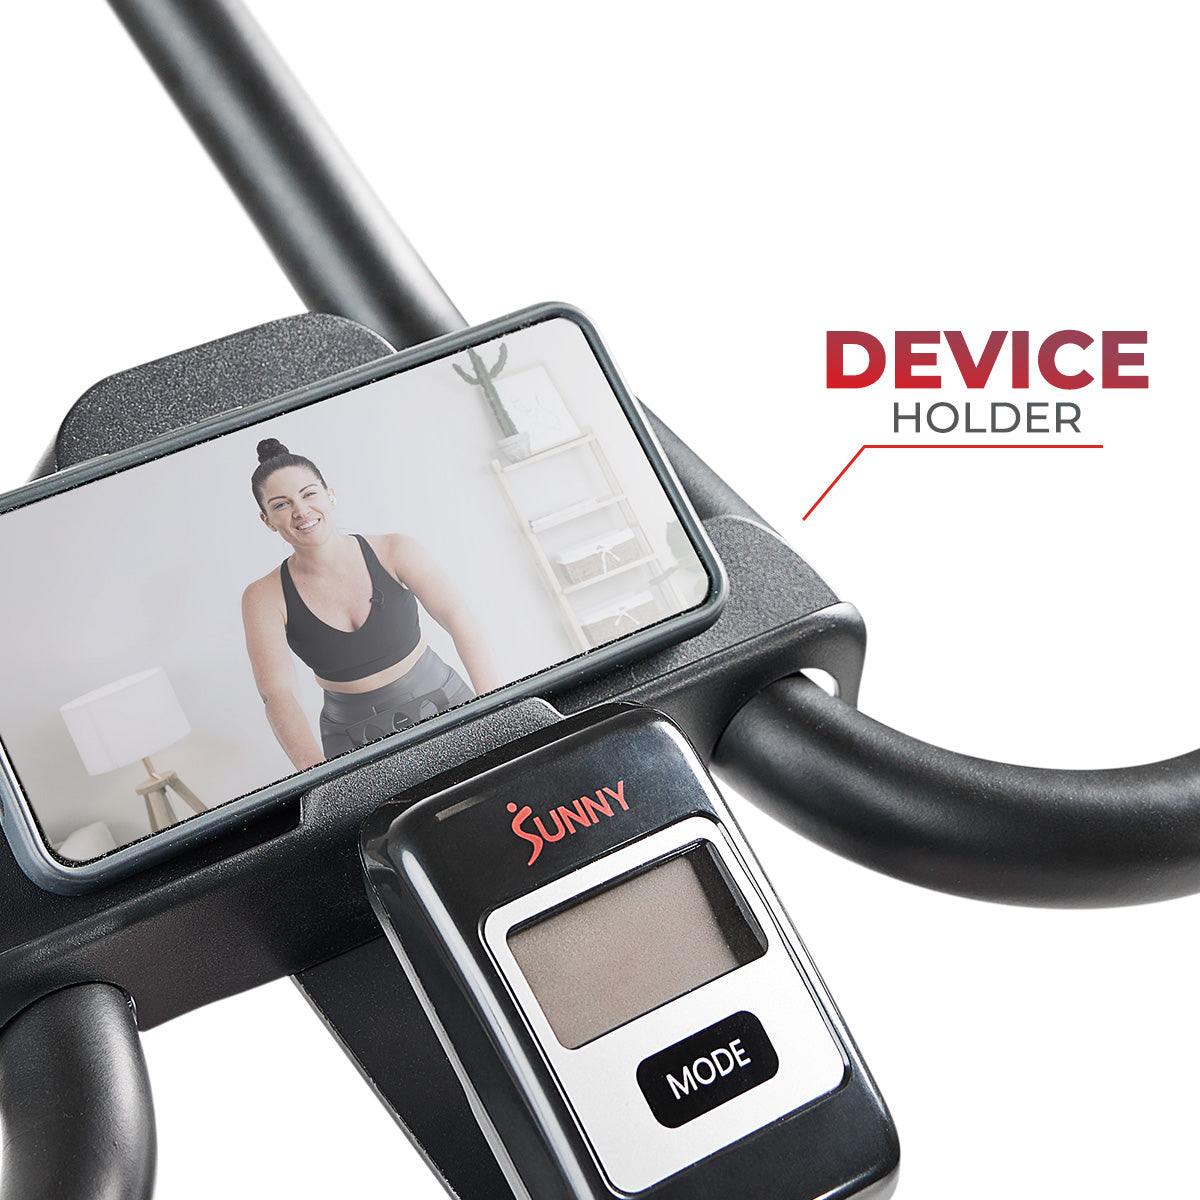 Premium Magnetic Resistance Smart Indoor Cycling Bike with Quiet Belt Drive and Exclusive SunnyFit? App Enhanced Bluetooth Connectivity